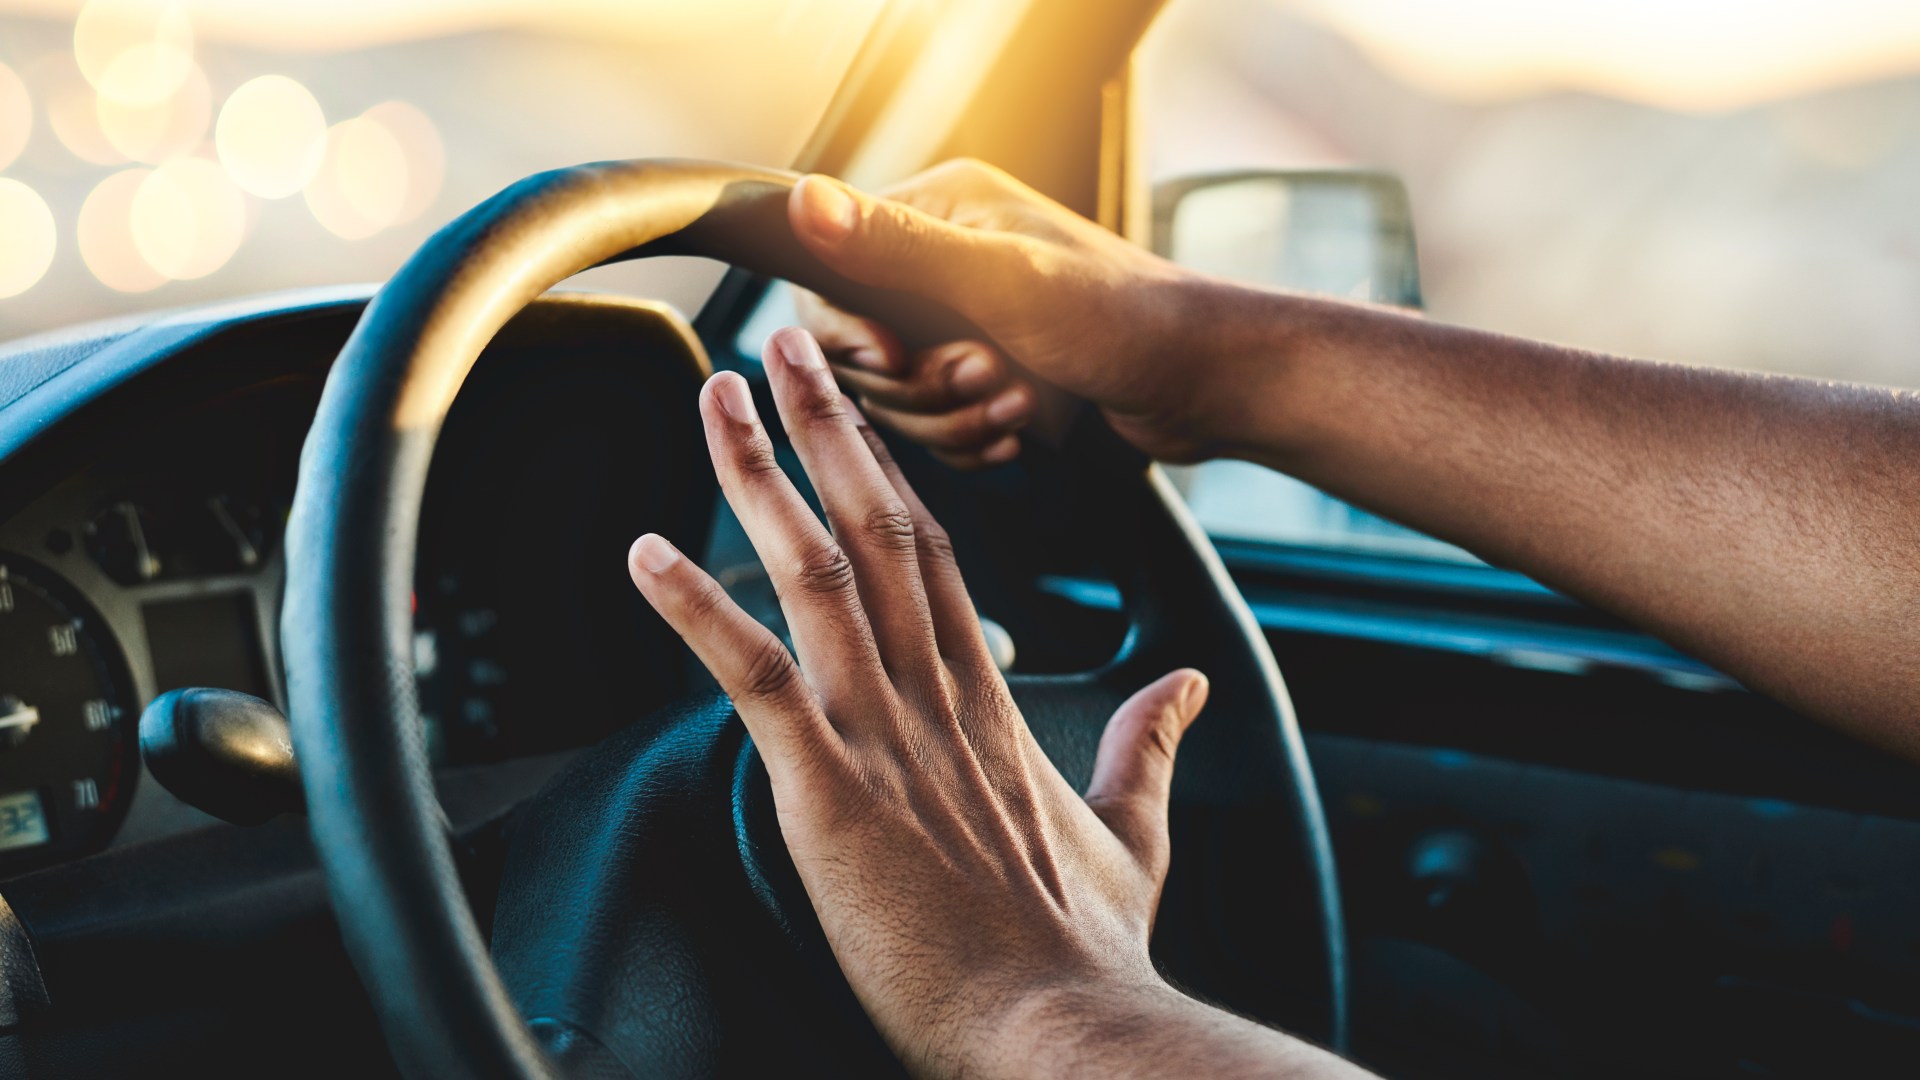 Can I be fined for beeping my car horn? Motoring rules for honking and when its illegal according to the Highway Code  The Irish Sun [Video]